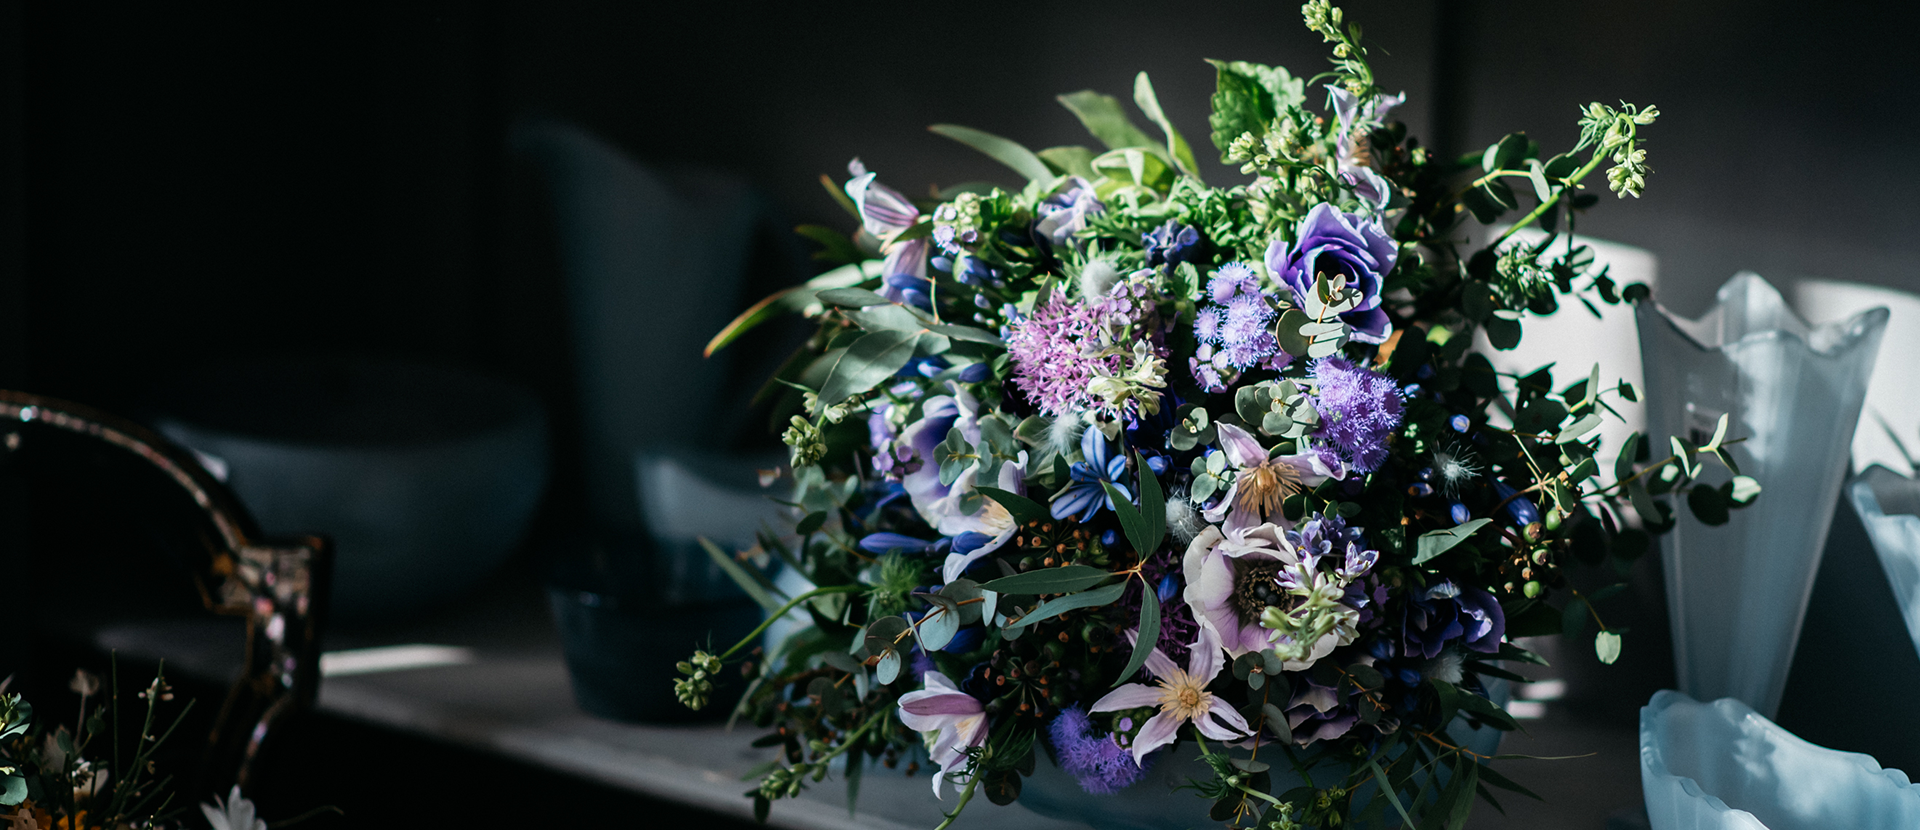 Flower bouquet with blue and violet flowers